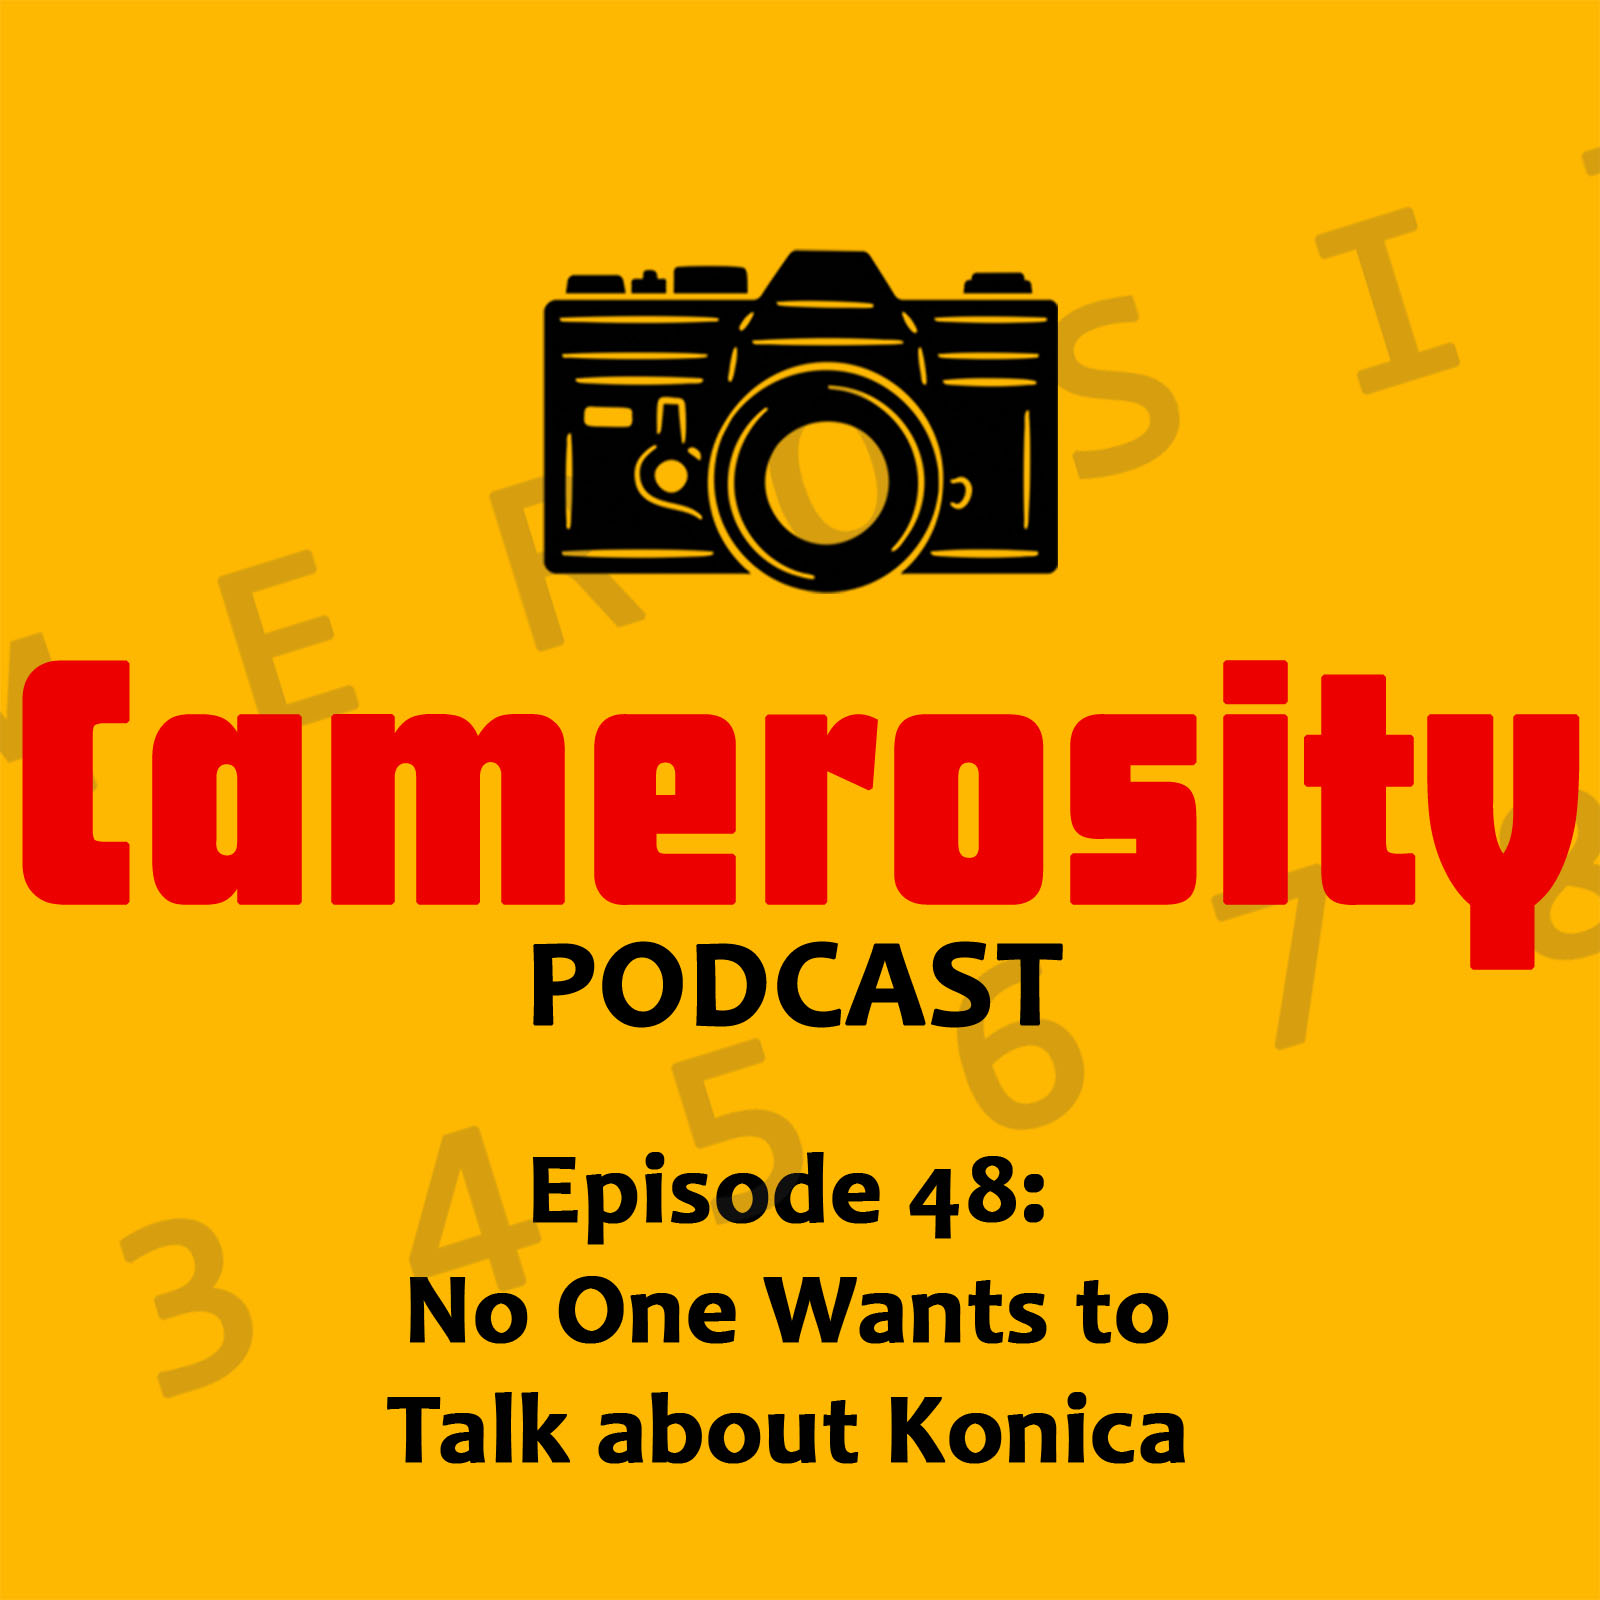 Episode 48: No One Wants to Talk About Konica